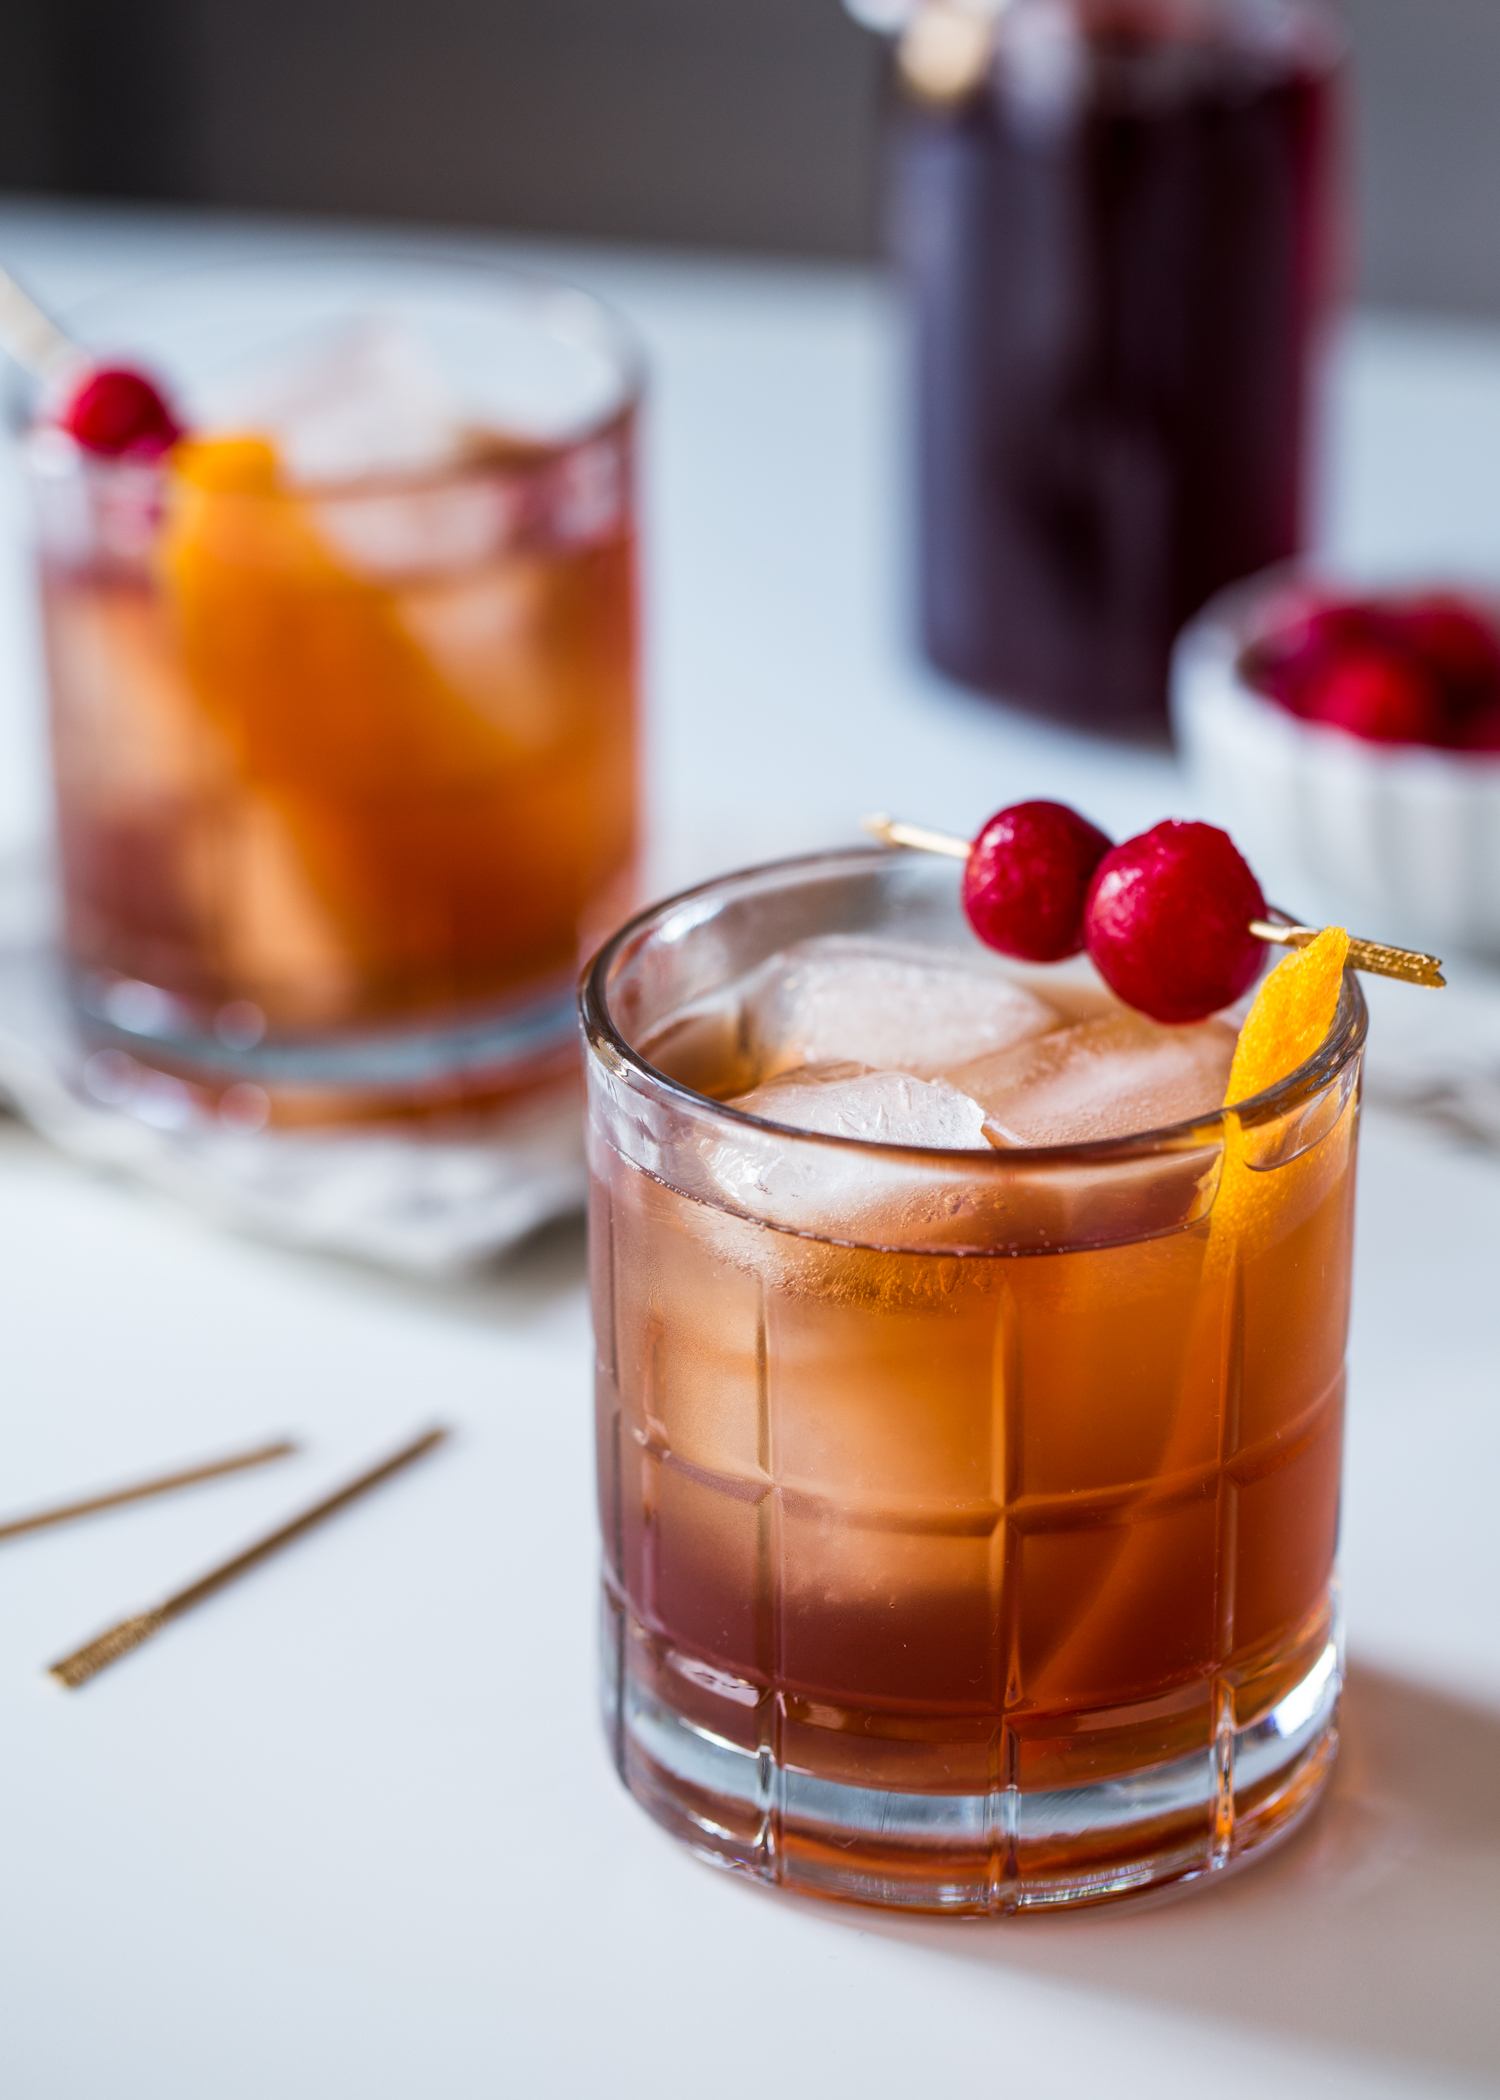 Tart Cherry Old Fashioned cocktails are perfect for Valentine's Day